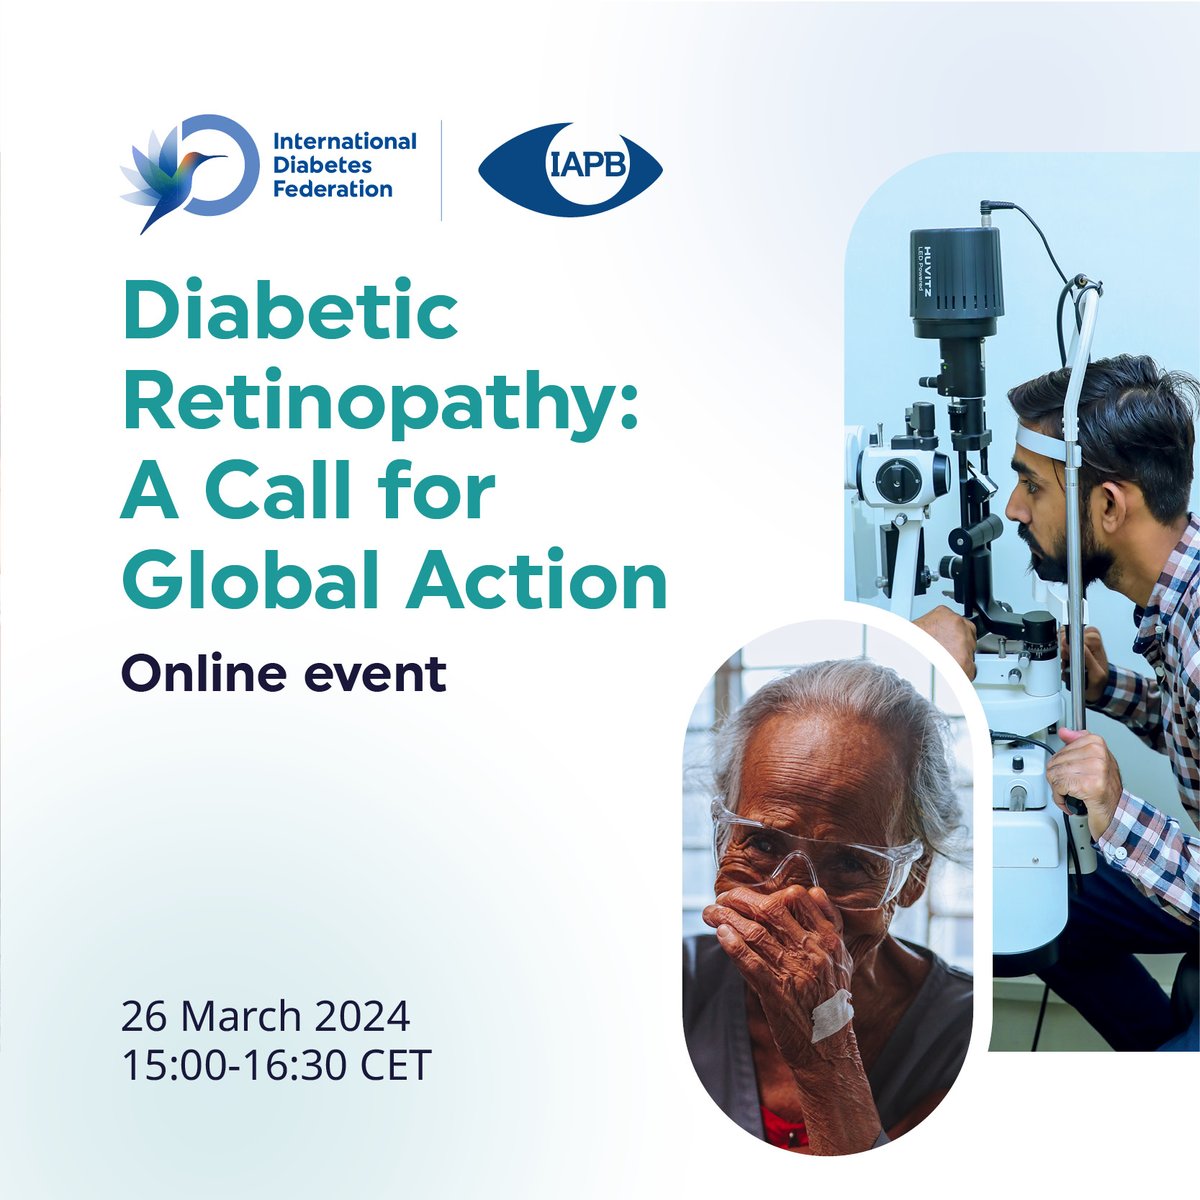 #Webinar - Join IDF and @IAPB1 on 26 March for an online event, exploring the economic, social and psychological impact diabetic retinopathy (DR) has on people with #diabetes. Register now: idf.org/events/webinar…